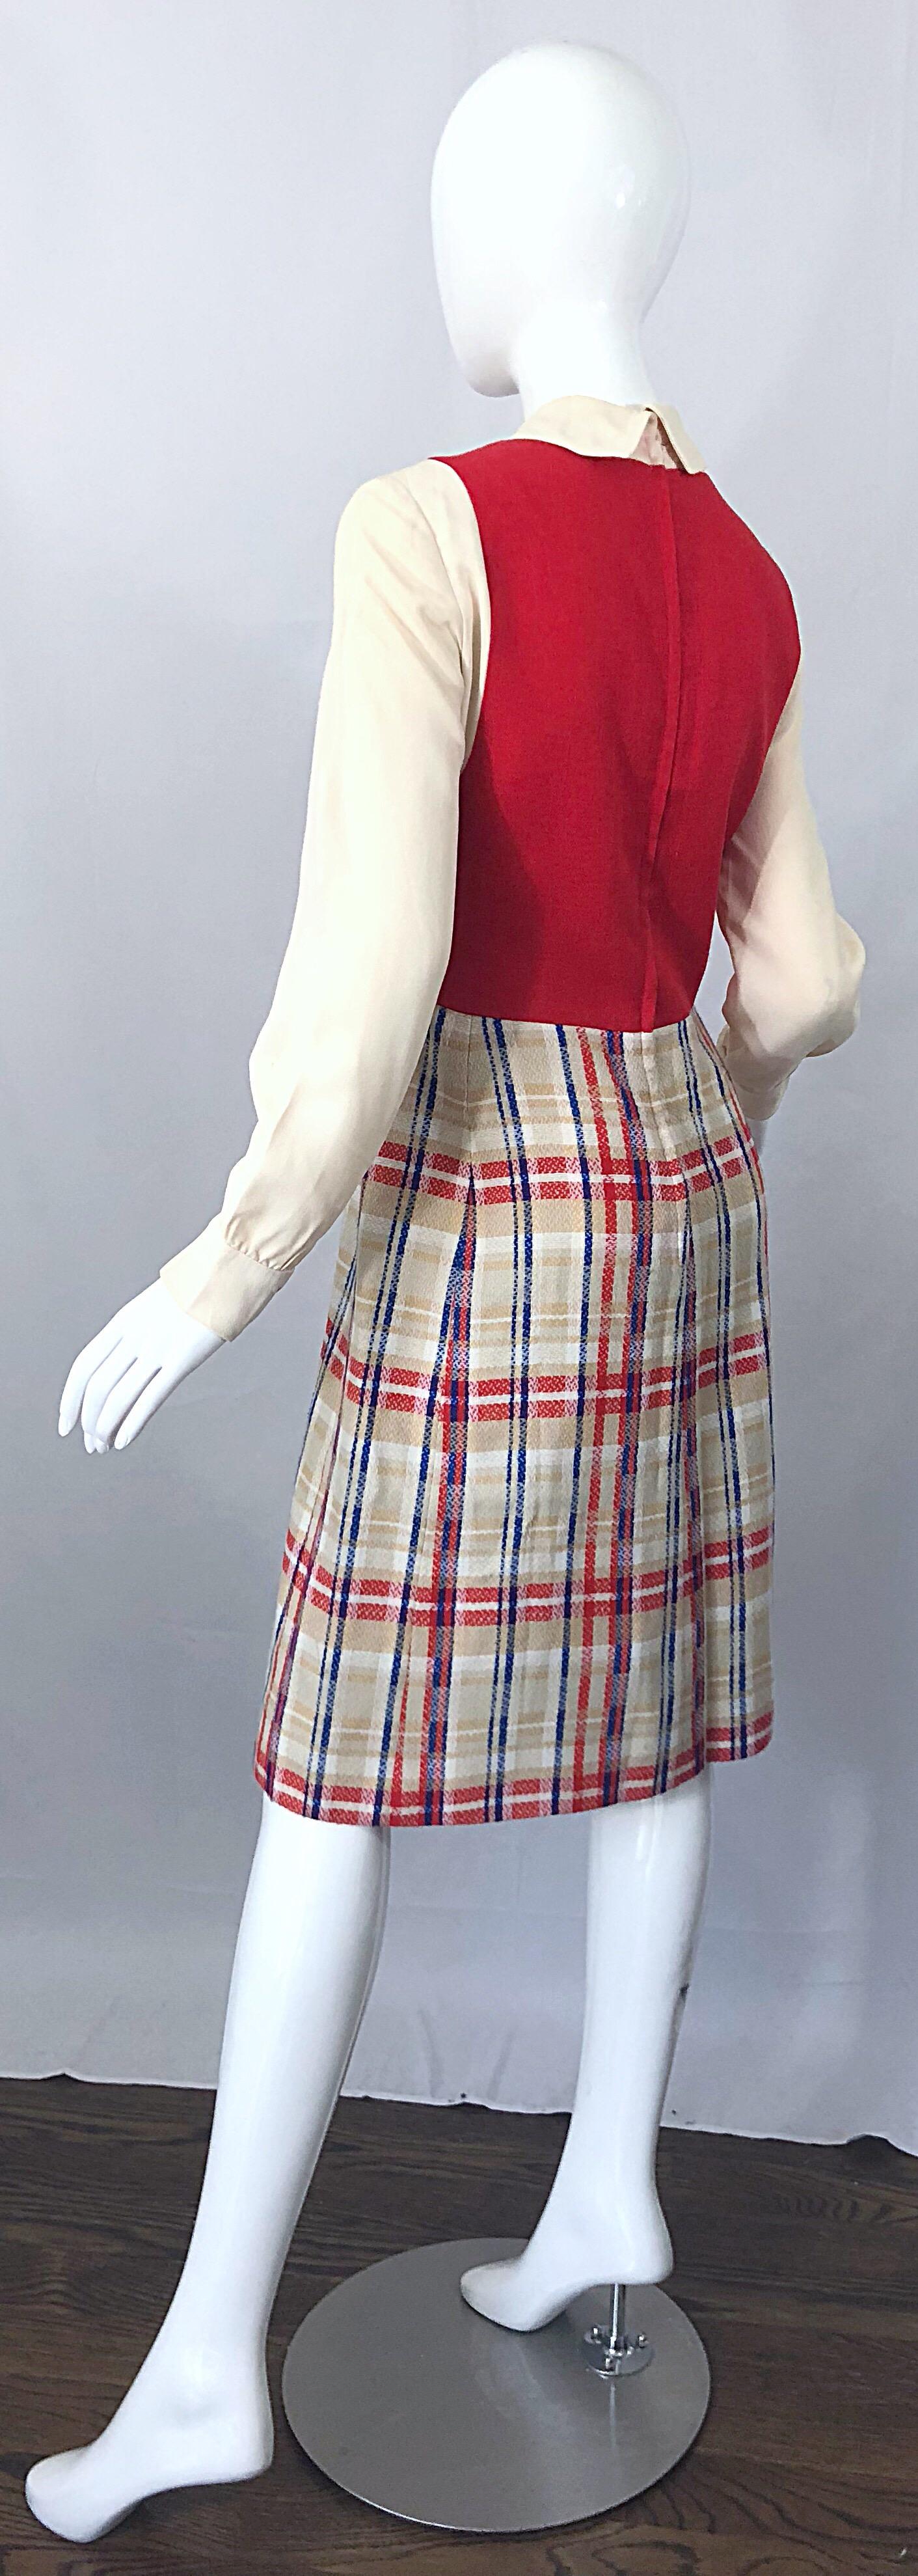 Chic 1960s Pat Sandler Trompe l'Oeil Red White and Blue Vintage 60s A Line Dress For Sale 3